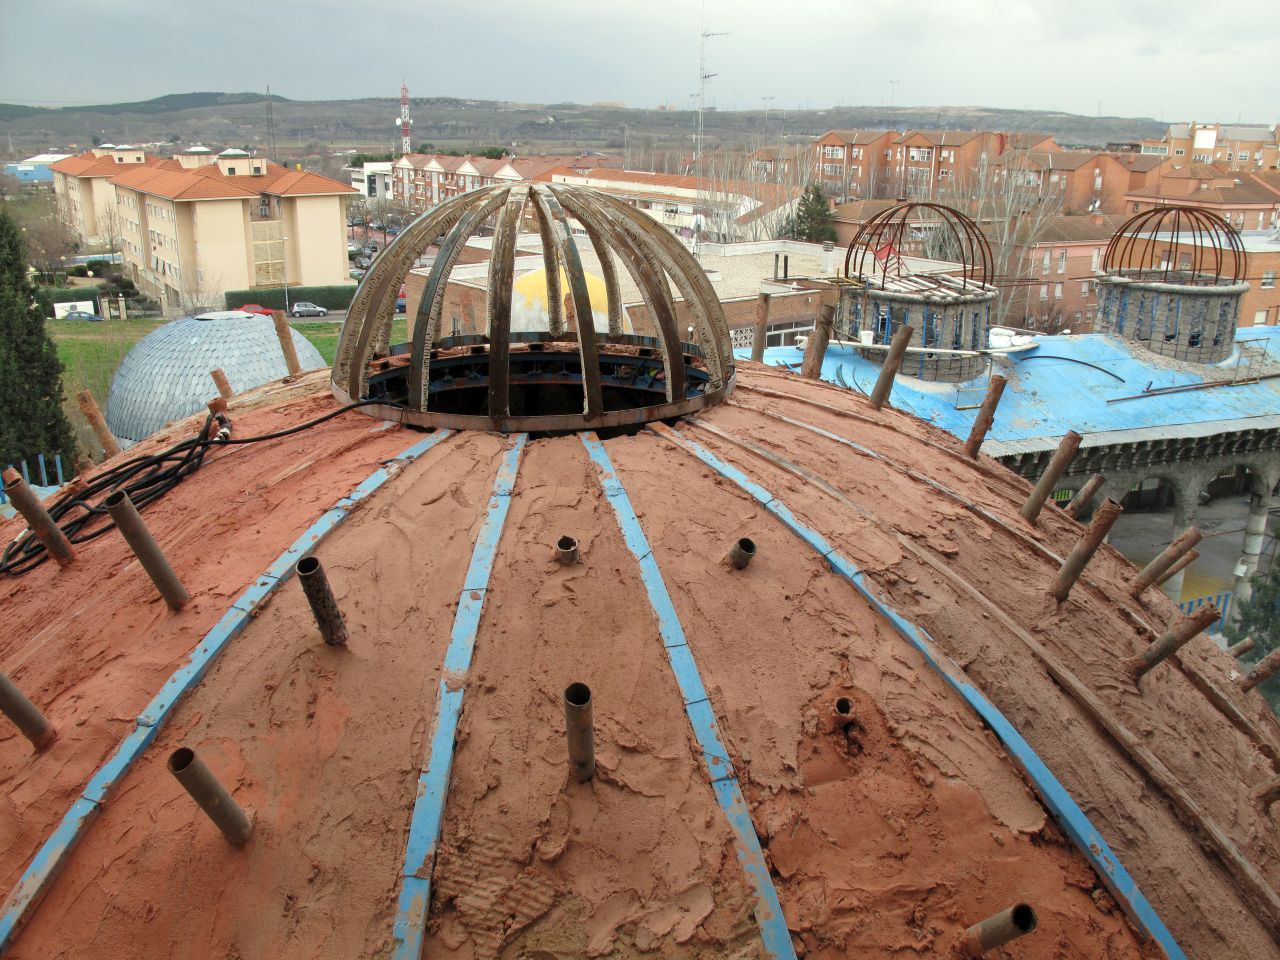 Small domes on the roof of the cathedral are pictured with the the residential buildings of Mejorada del Campo in the background. The largest dome is similar in appearance to the famous St Peter's basilica in the Vatican City.